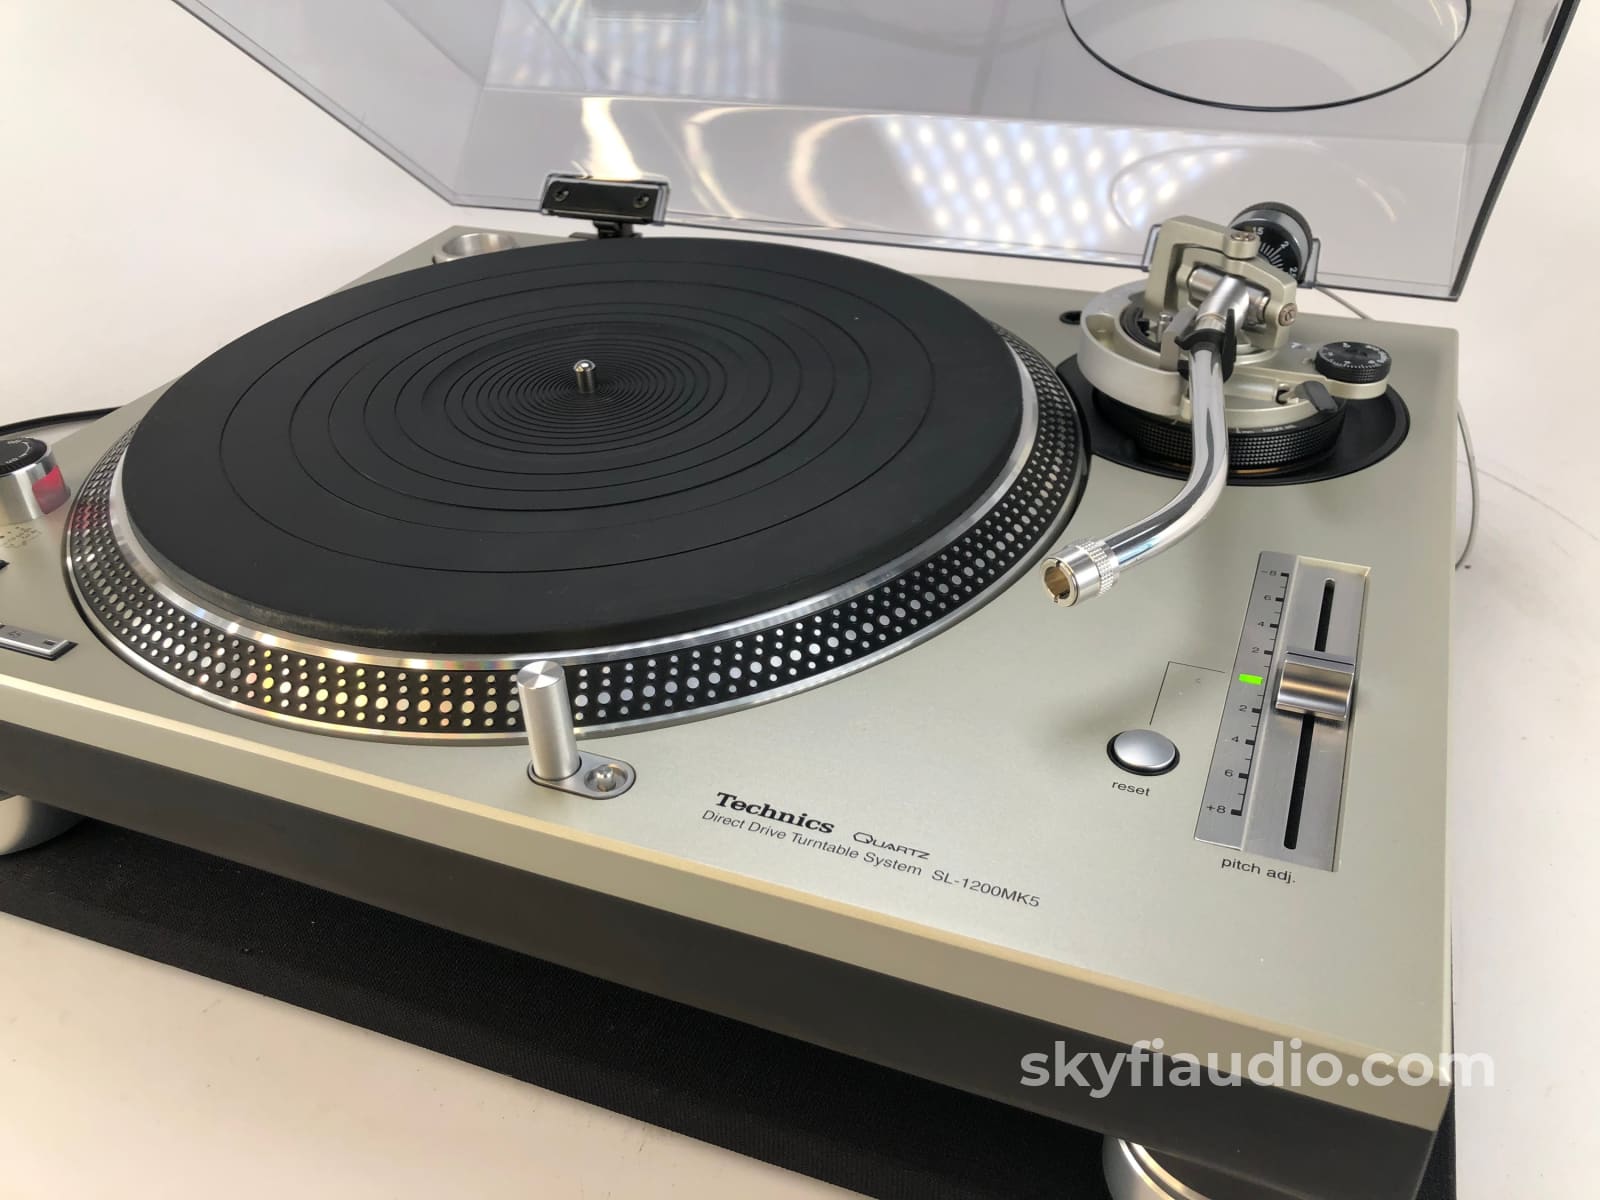 Kab Electro-Acoustics / Technics Sl-1200Mk5 Audiophile Standard Turntable - Direct Drive And Highly